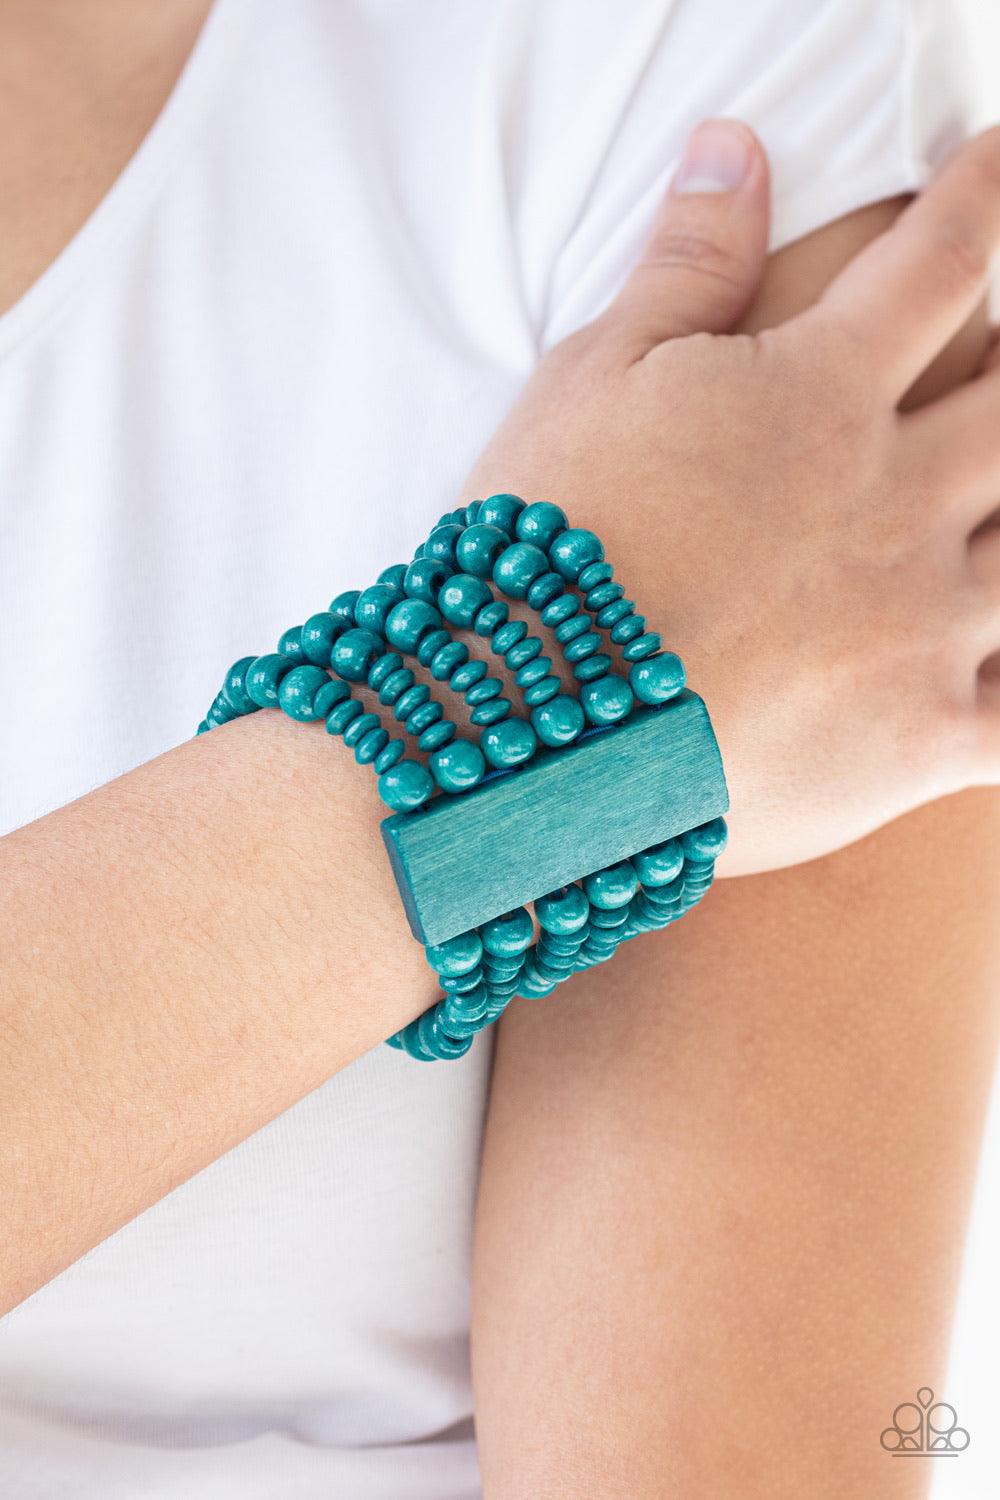 Paparazzi Accessories Don’t Stop BELIZE-ing - Blue Brushed in a refreshing blue finish, rectangular wooden frames hold together a collection of wooden beads threaded along stretchy bands, coalescing into a summery display around the wrist. Jewelry